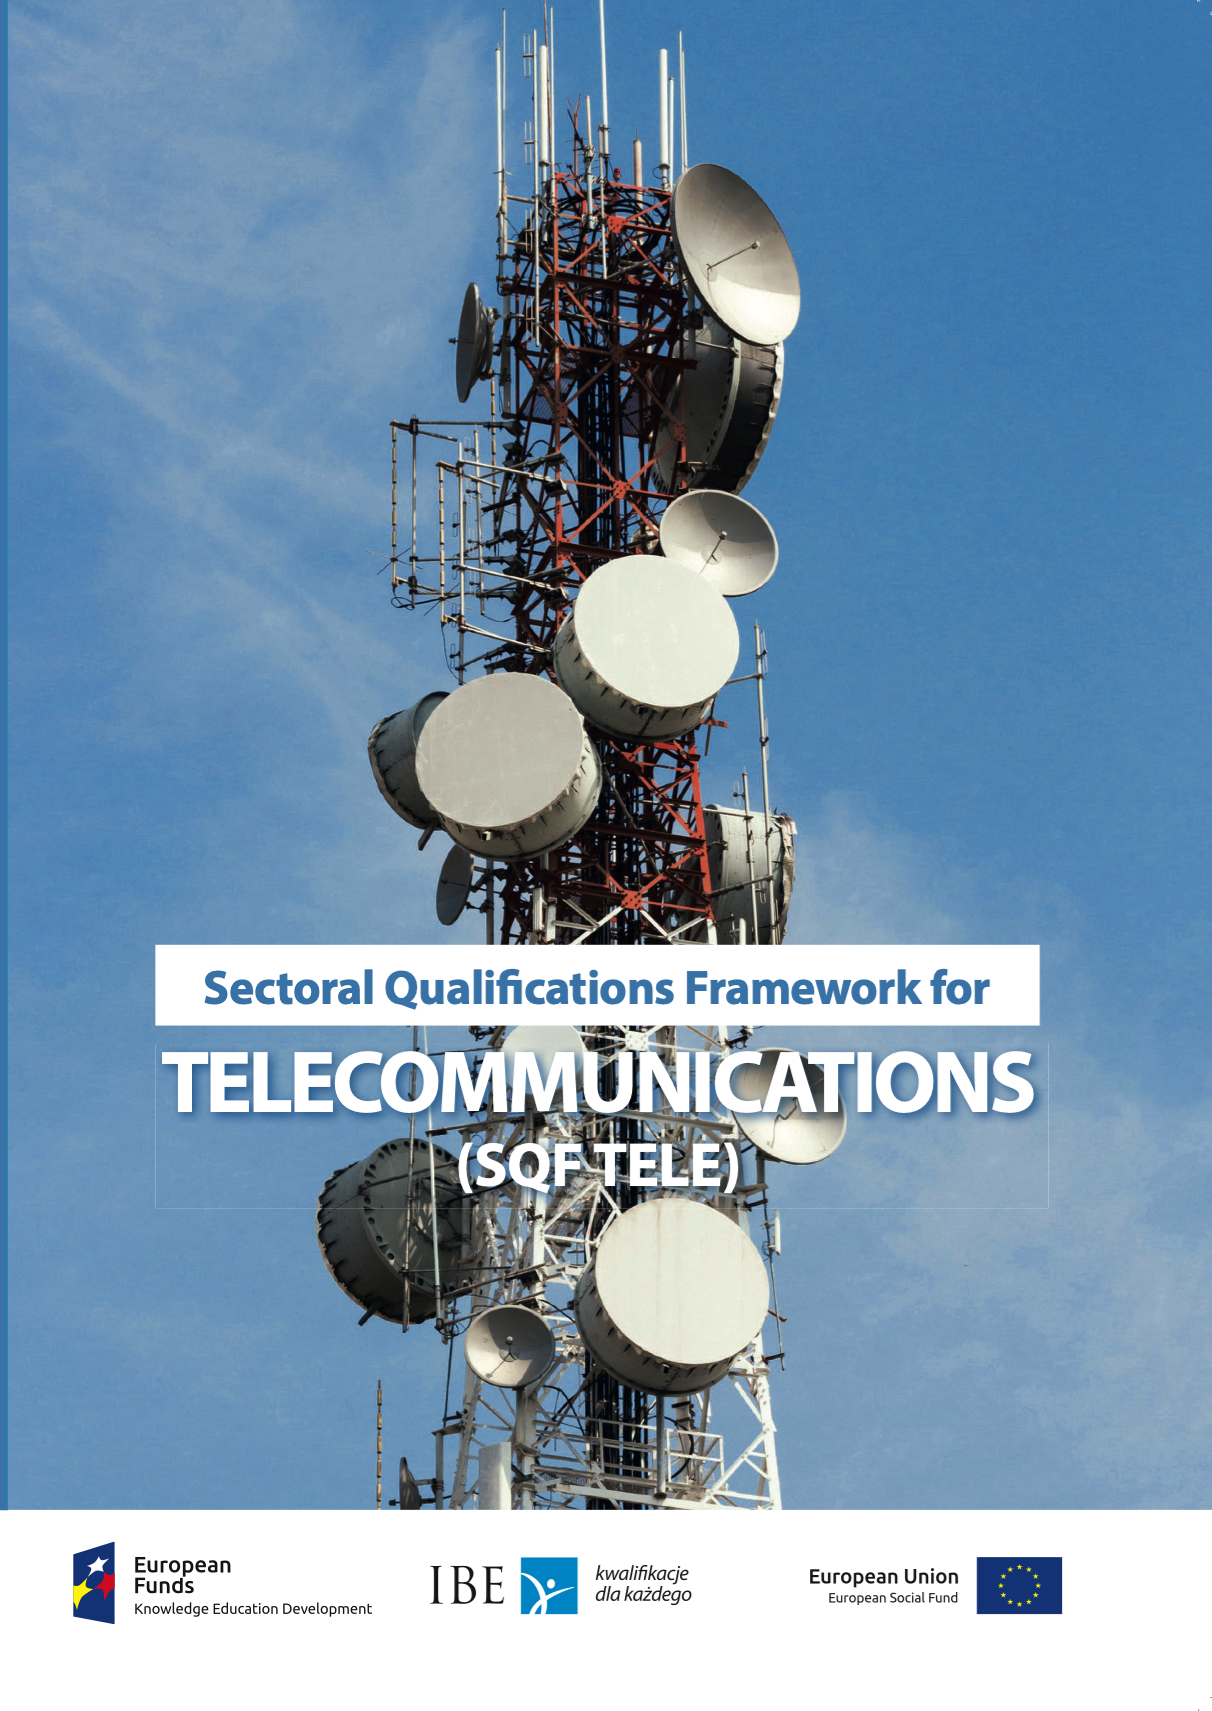 Sectoral Qualifications Framework for Telecommunications (SQF TELE)